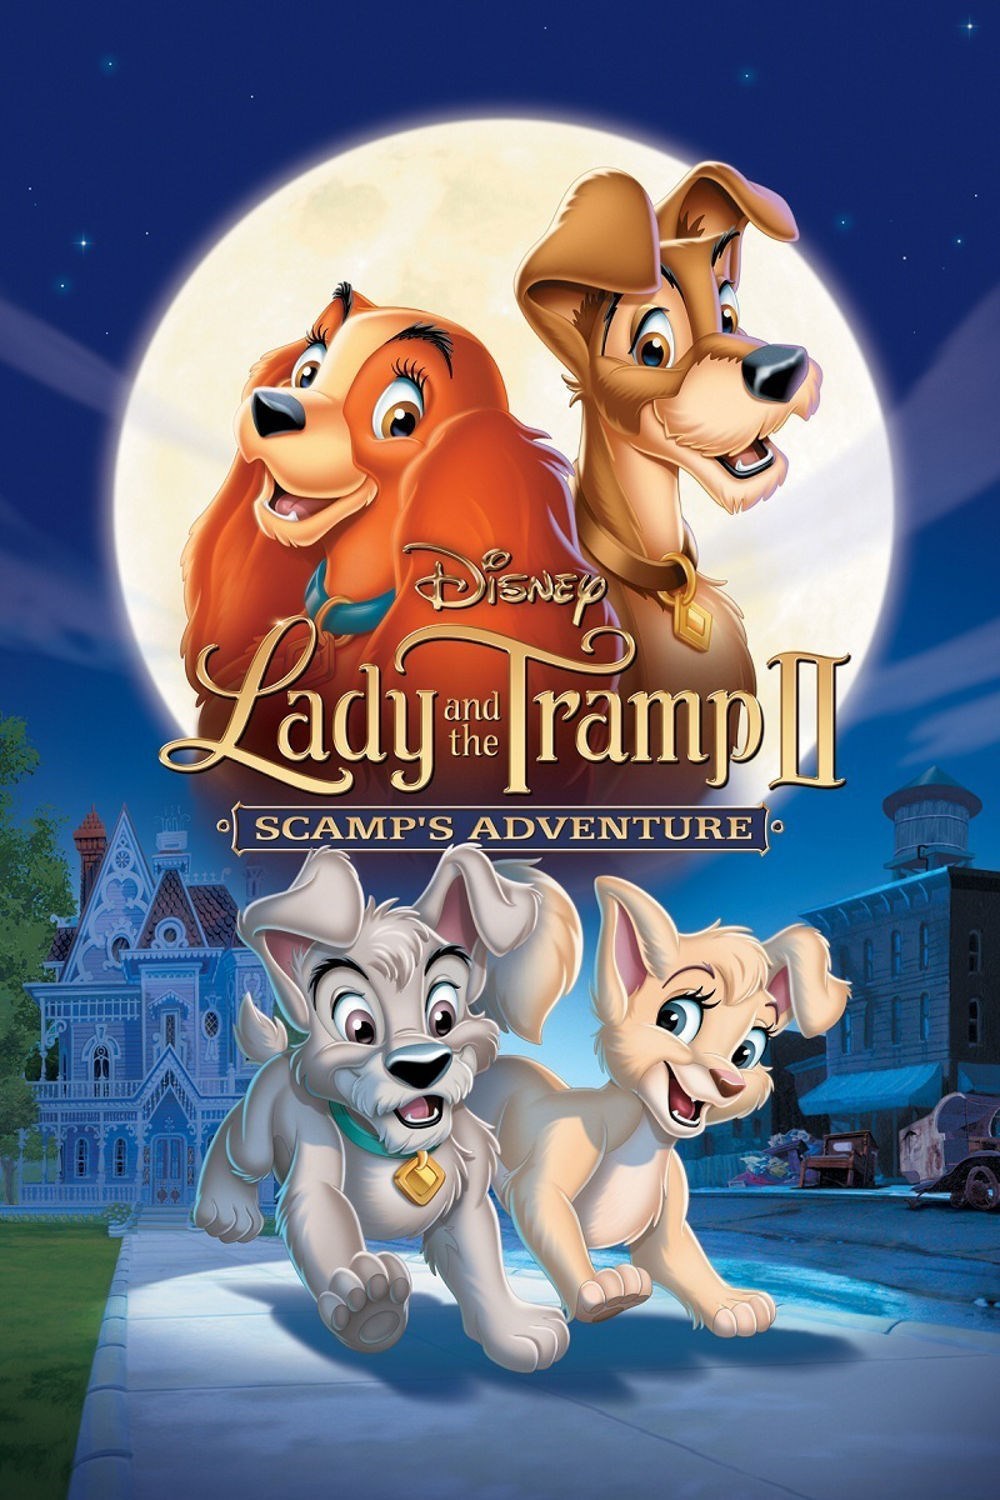 Lady and the Tramp II: Scamp's Adventure (Western Animation) - TV Tropes